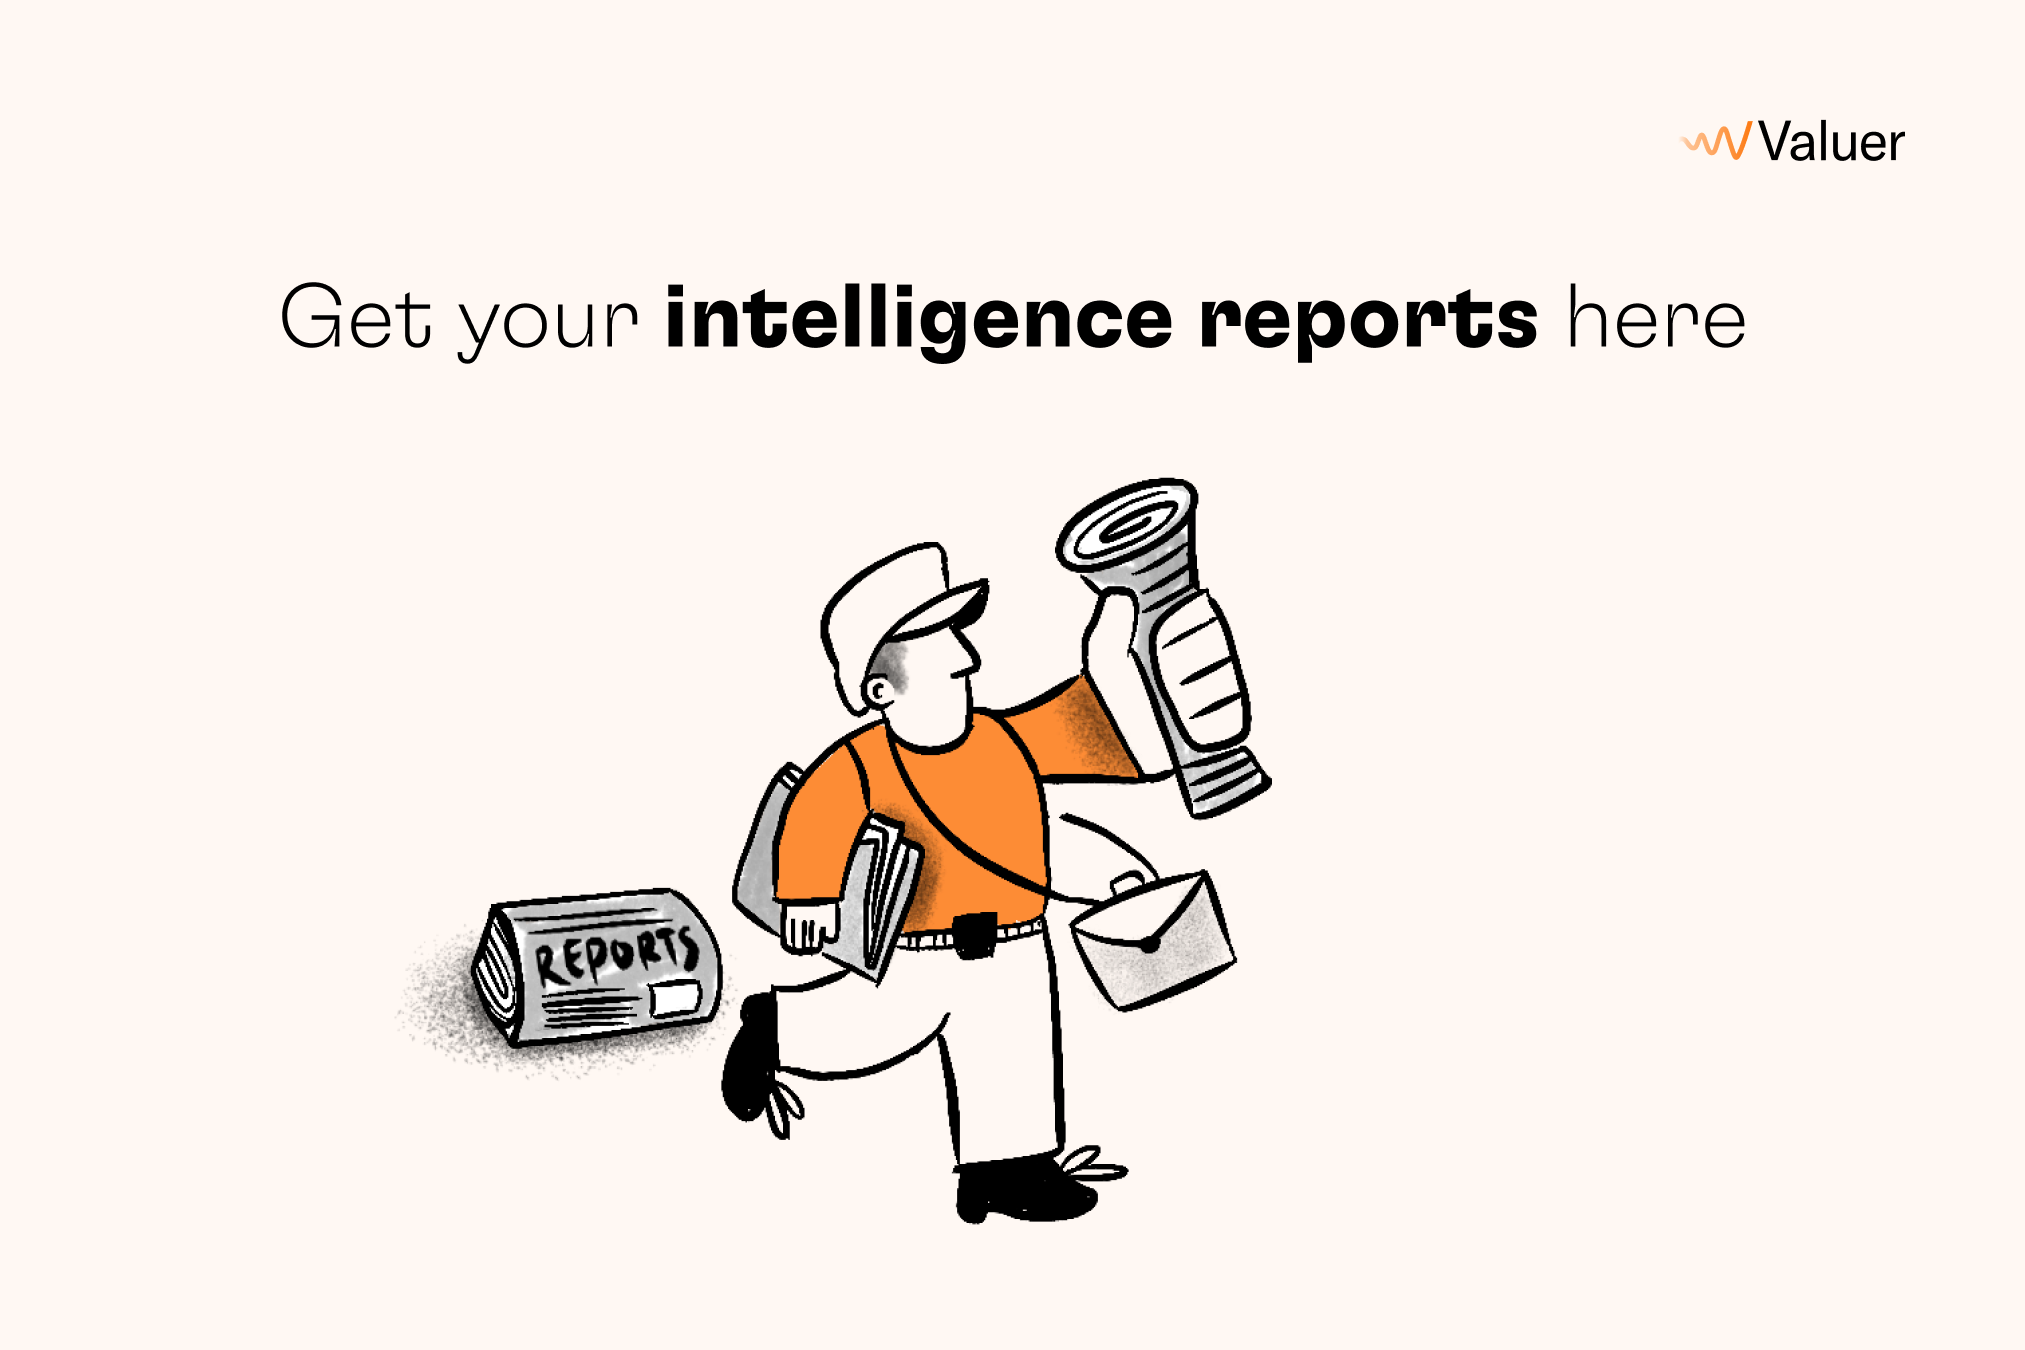 Get your intelligence reports here